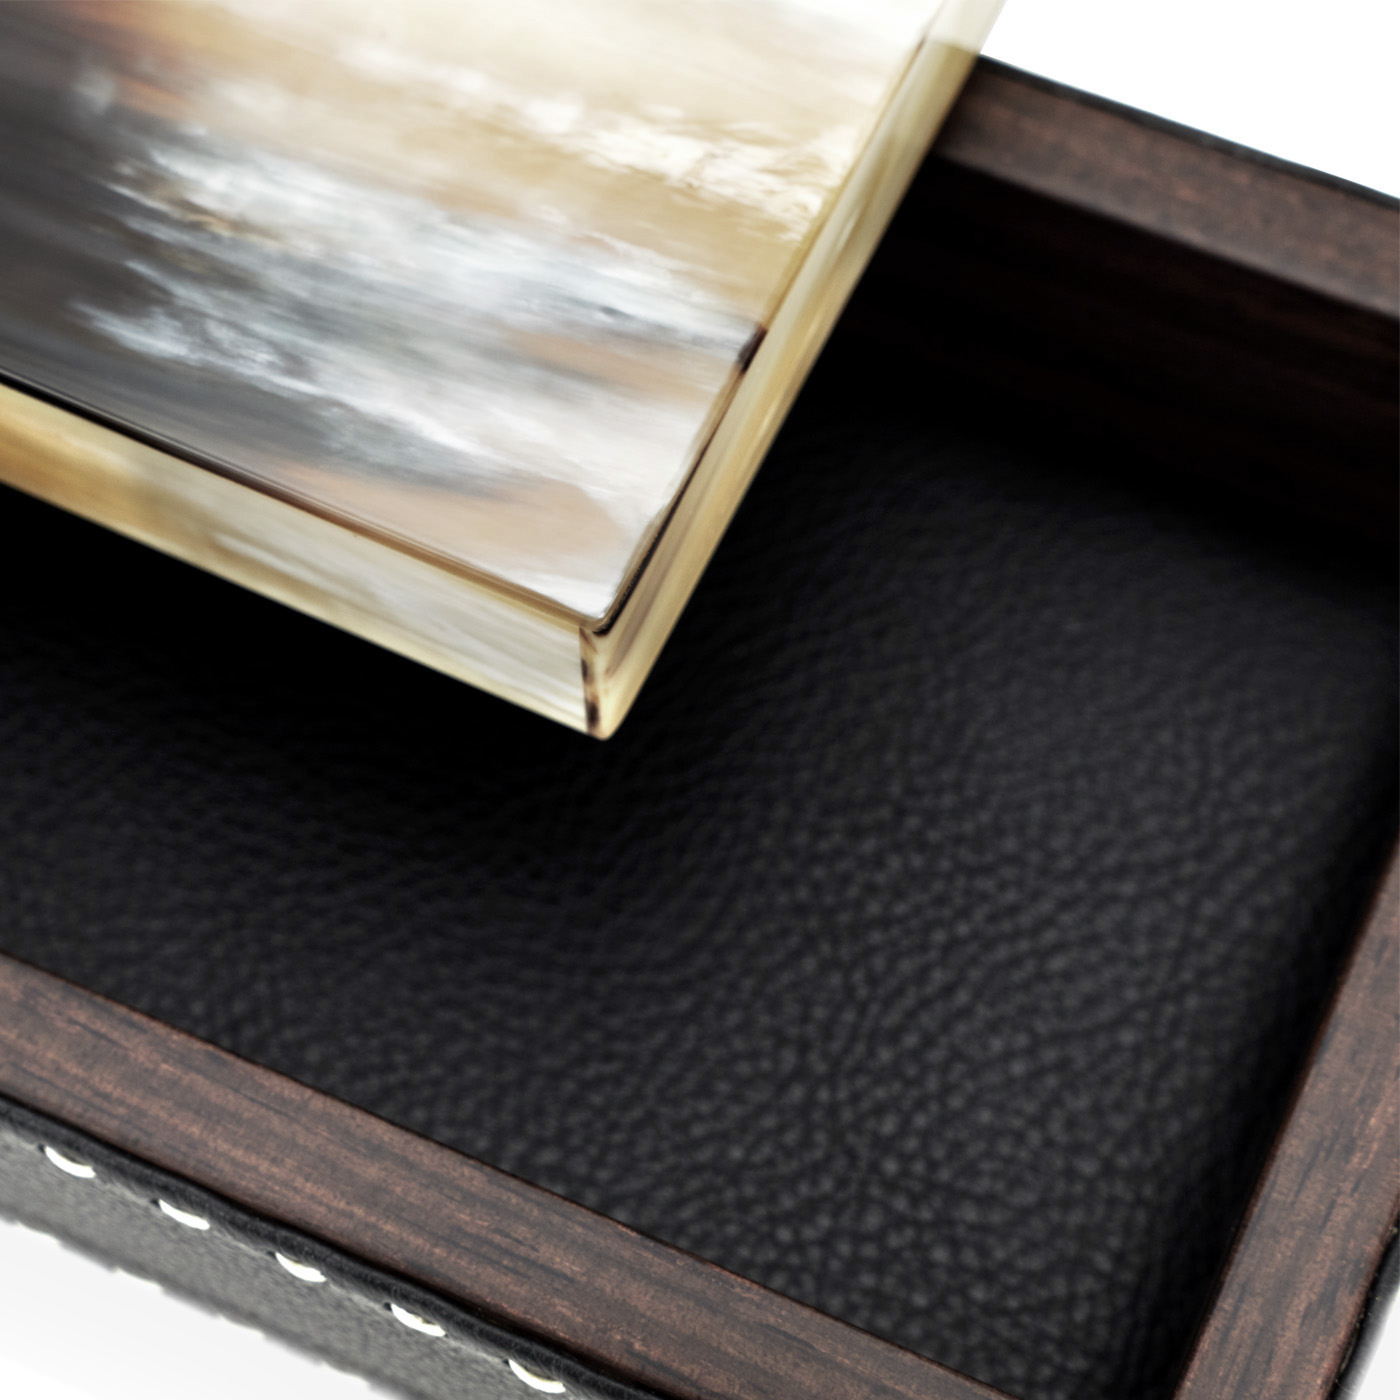 Picture frames and boxes - Ottavia box in horn and Onyx colour leather mod. 4469 - detail - Arcahorn